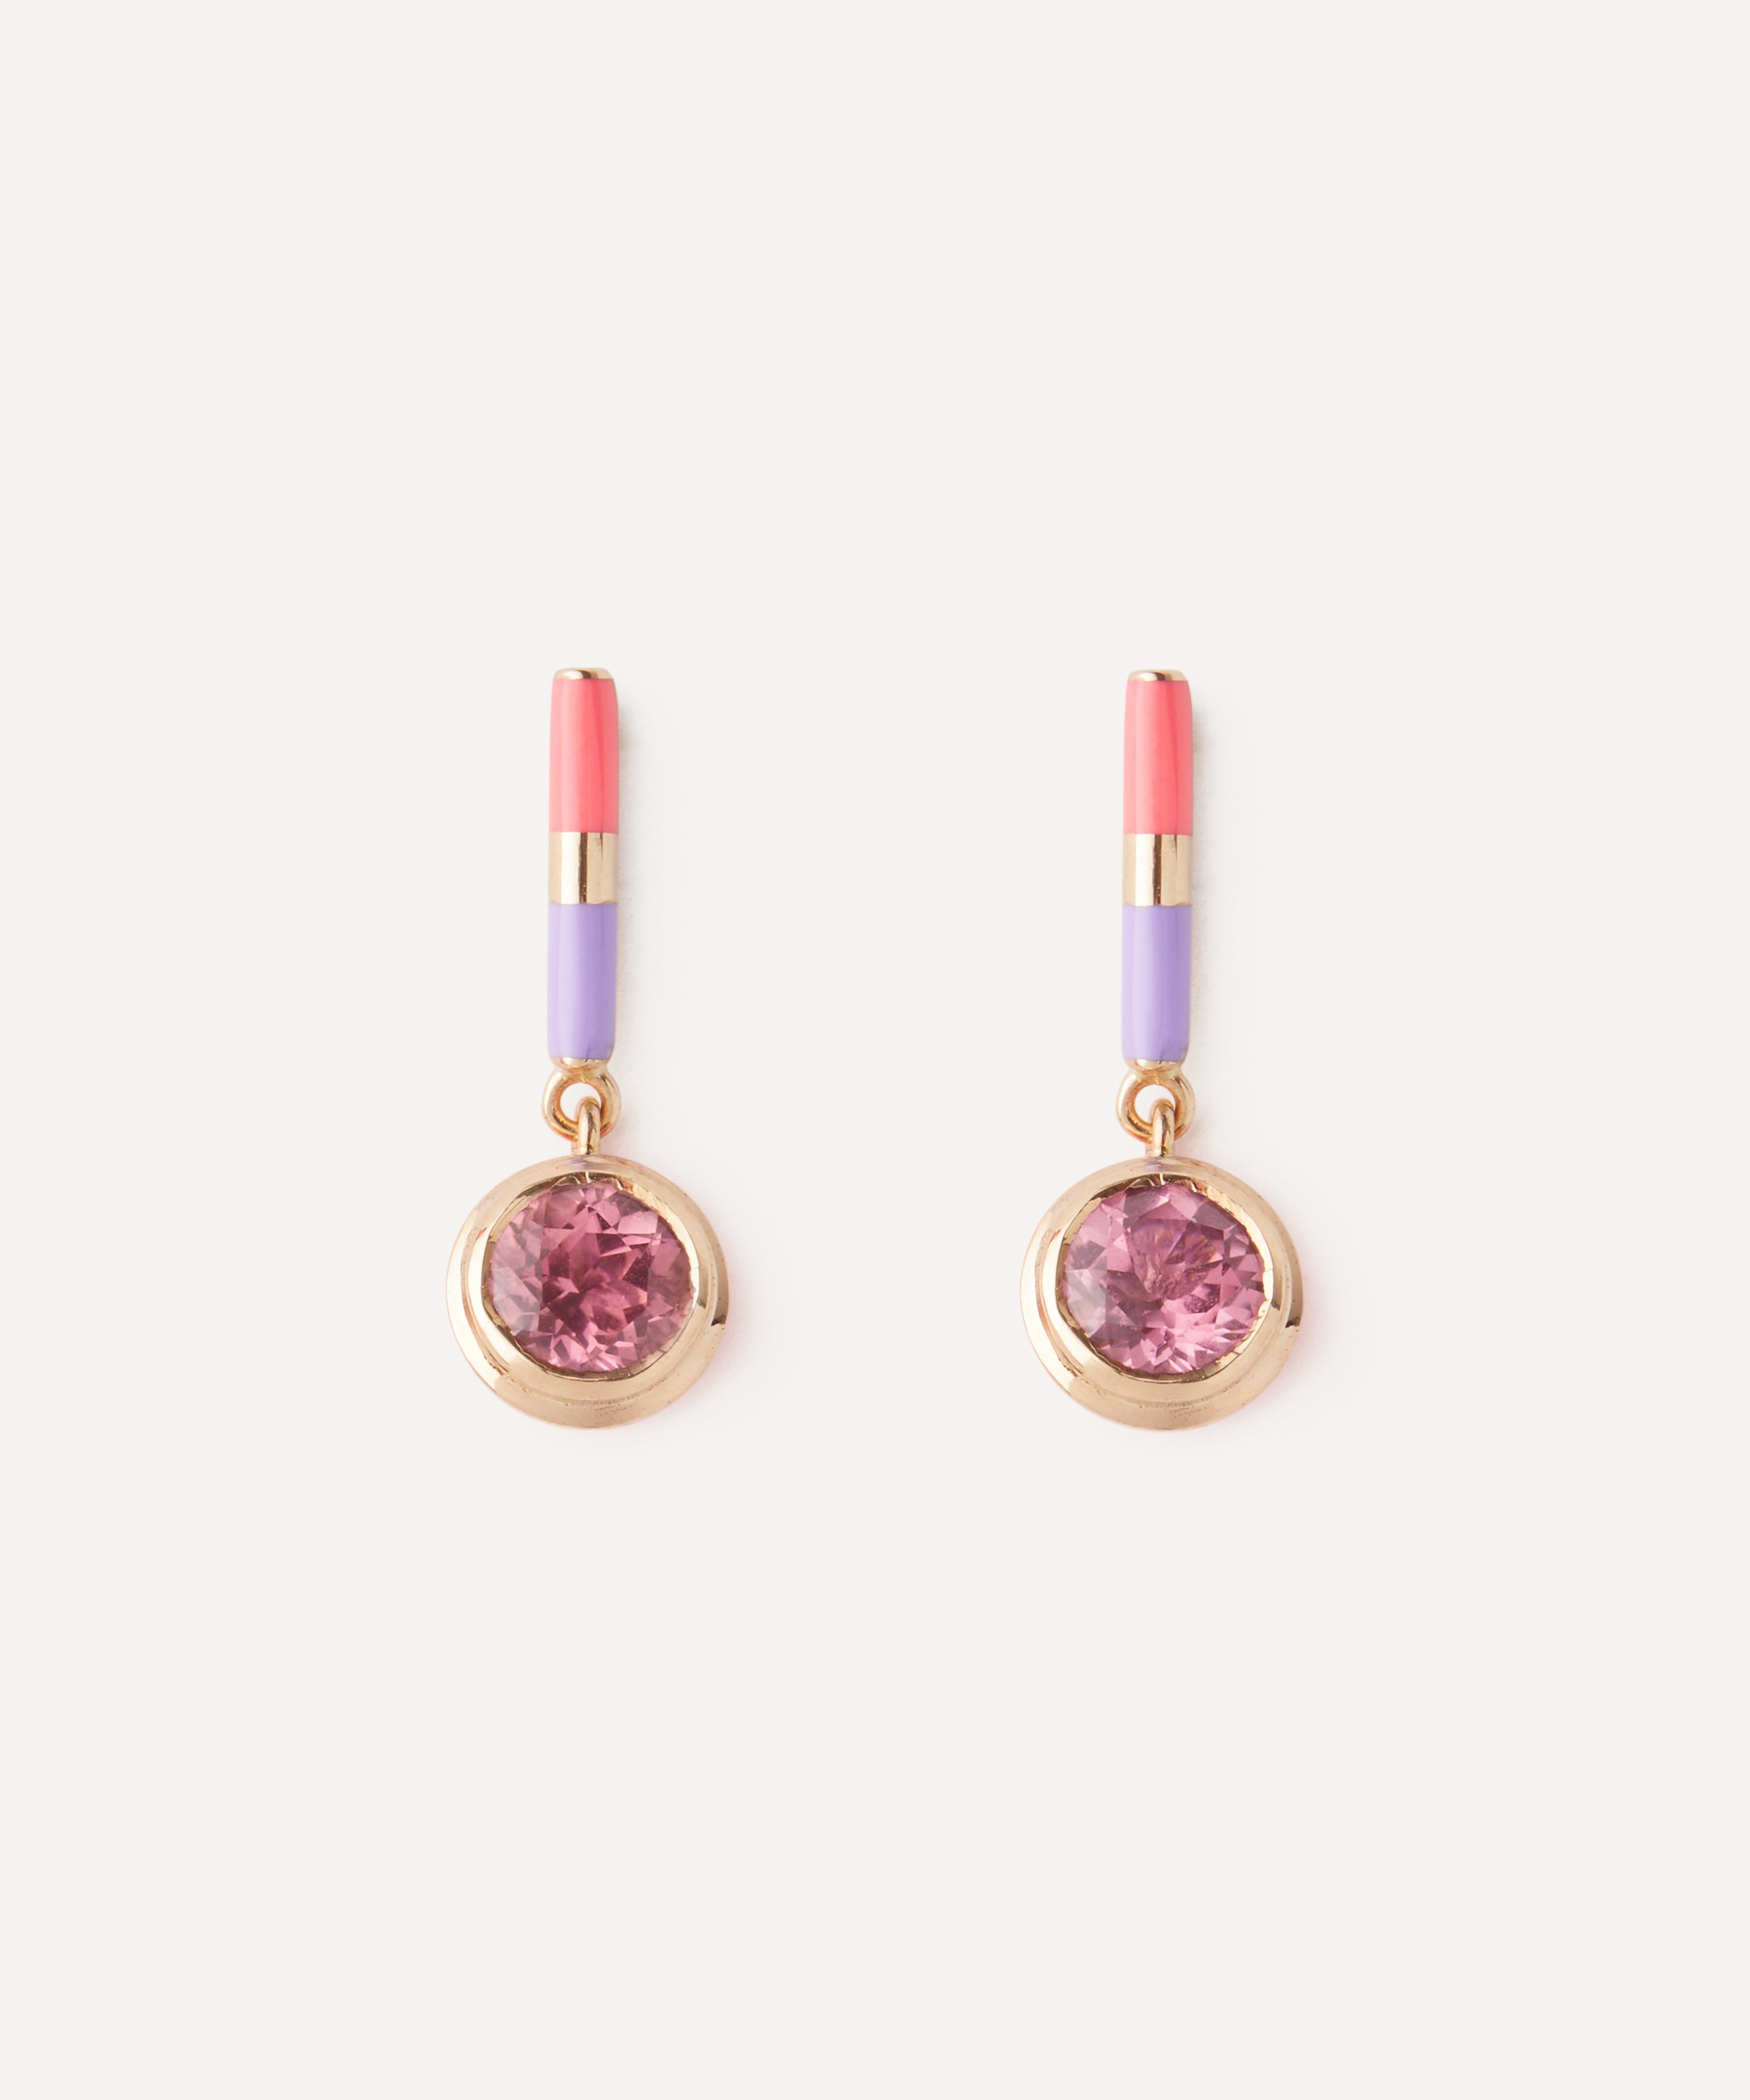 Alice Cicolini - 14ct Gold Candy Lacquer Pink Tourmaline Drop Earrings